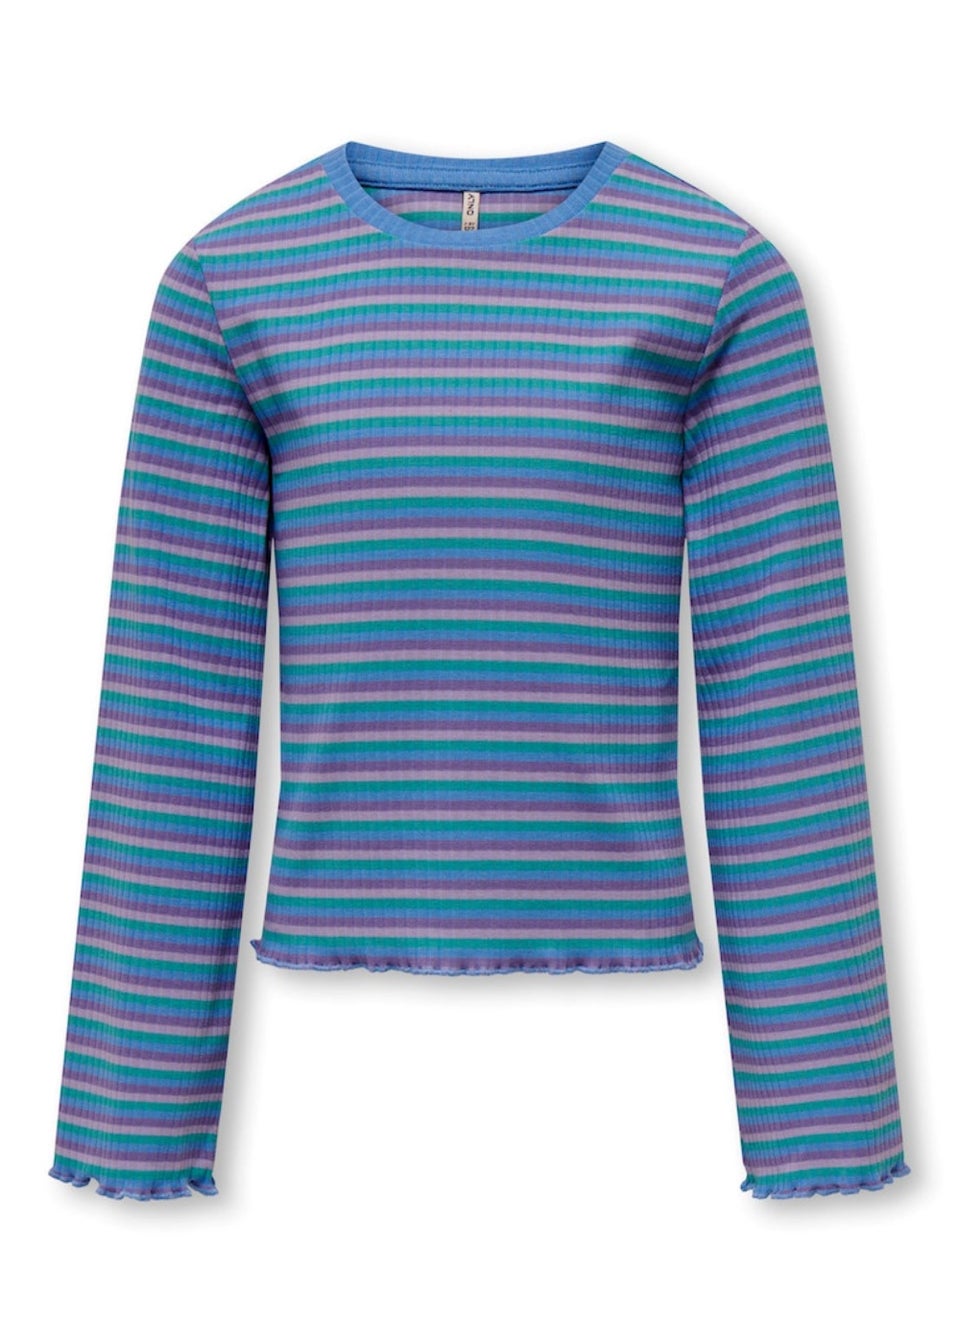 ONLY Kids Blue Long Sleeve Top (5-14yrs)